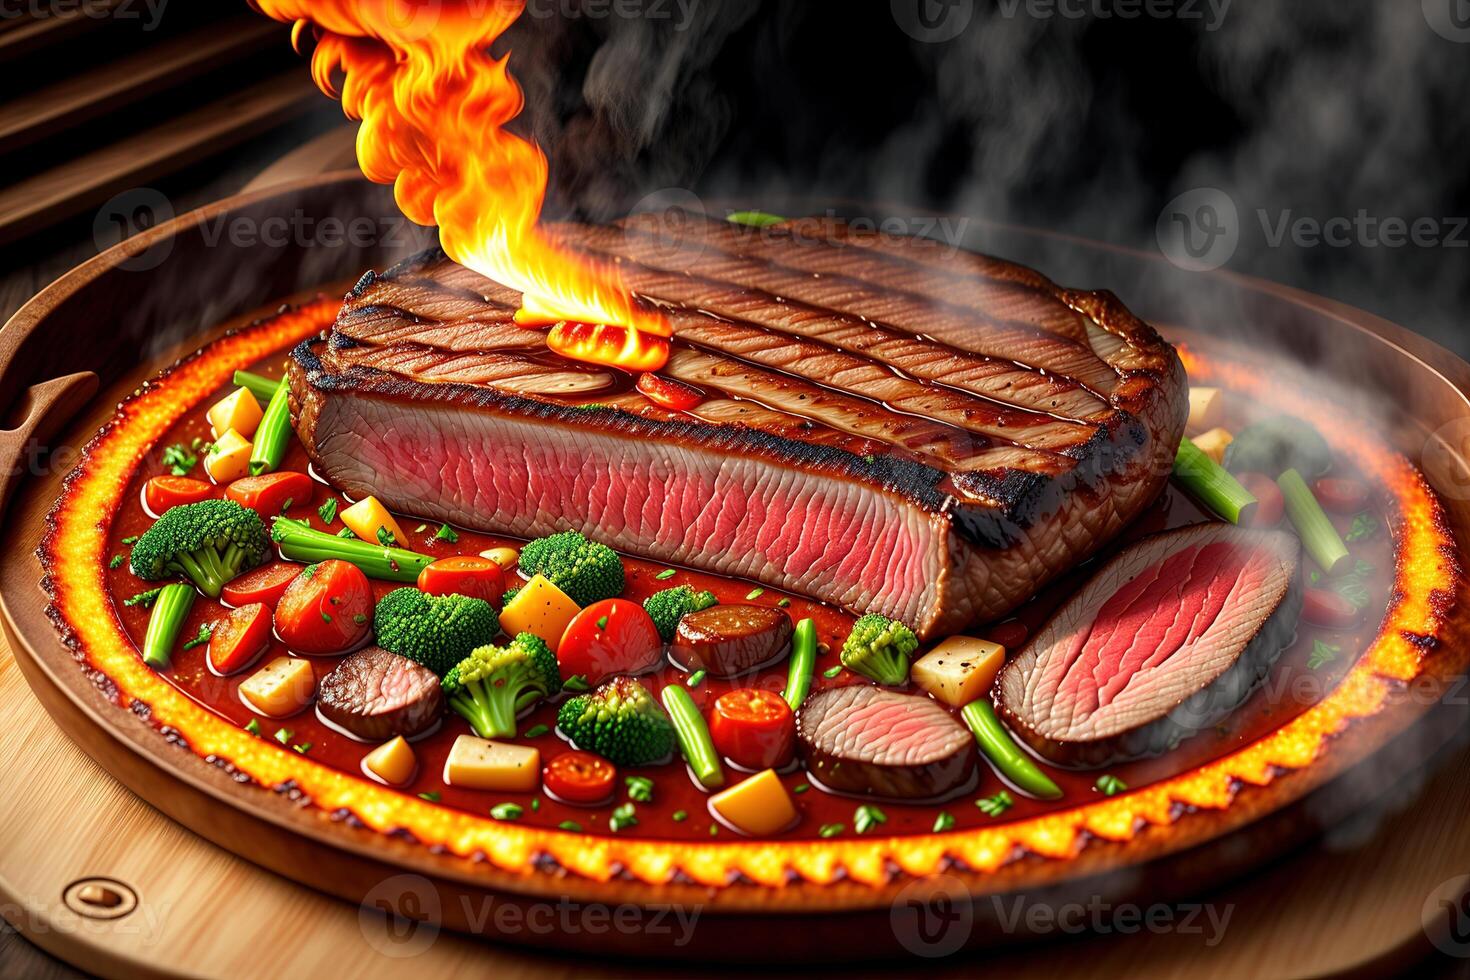 Grilled beef steak with vegetable on the flaming grill by photo